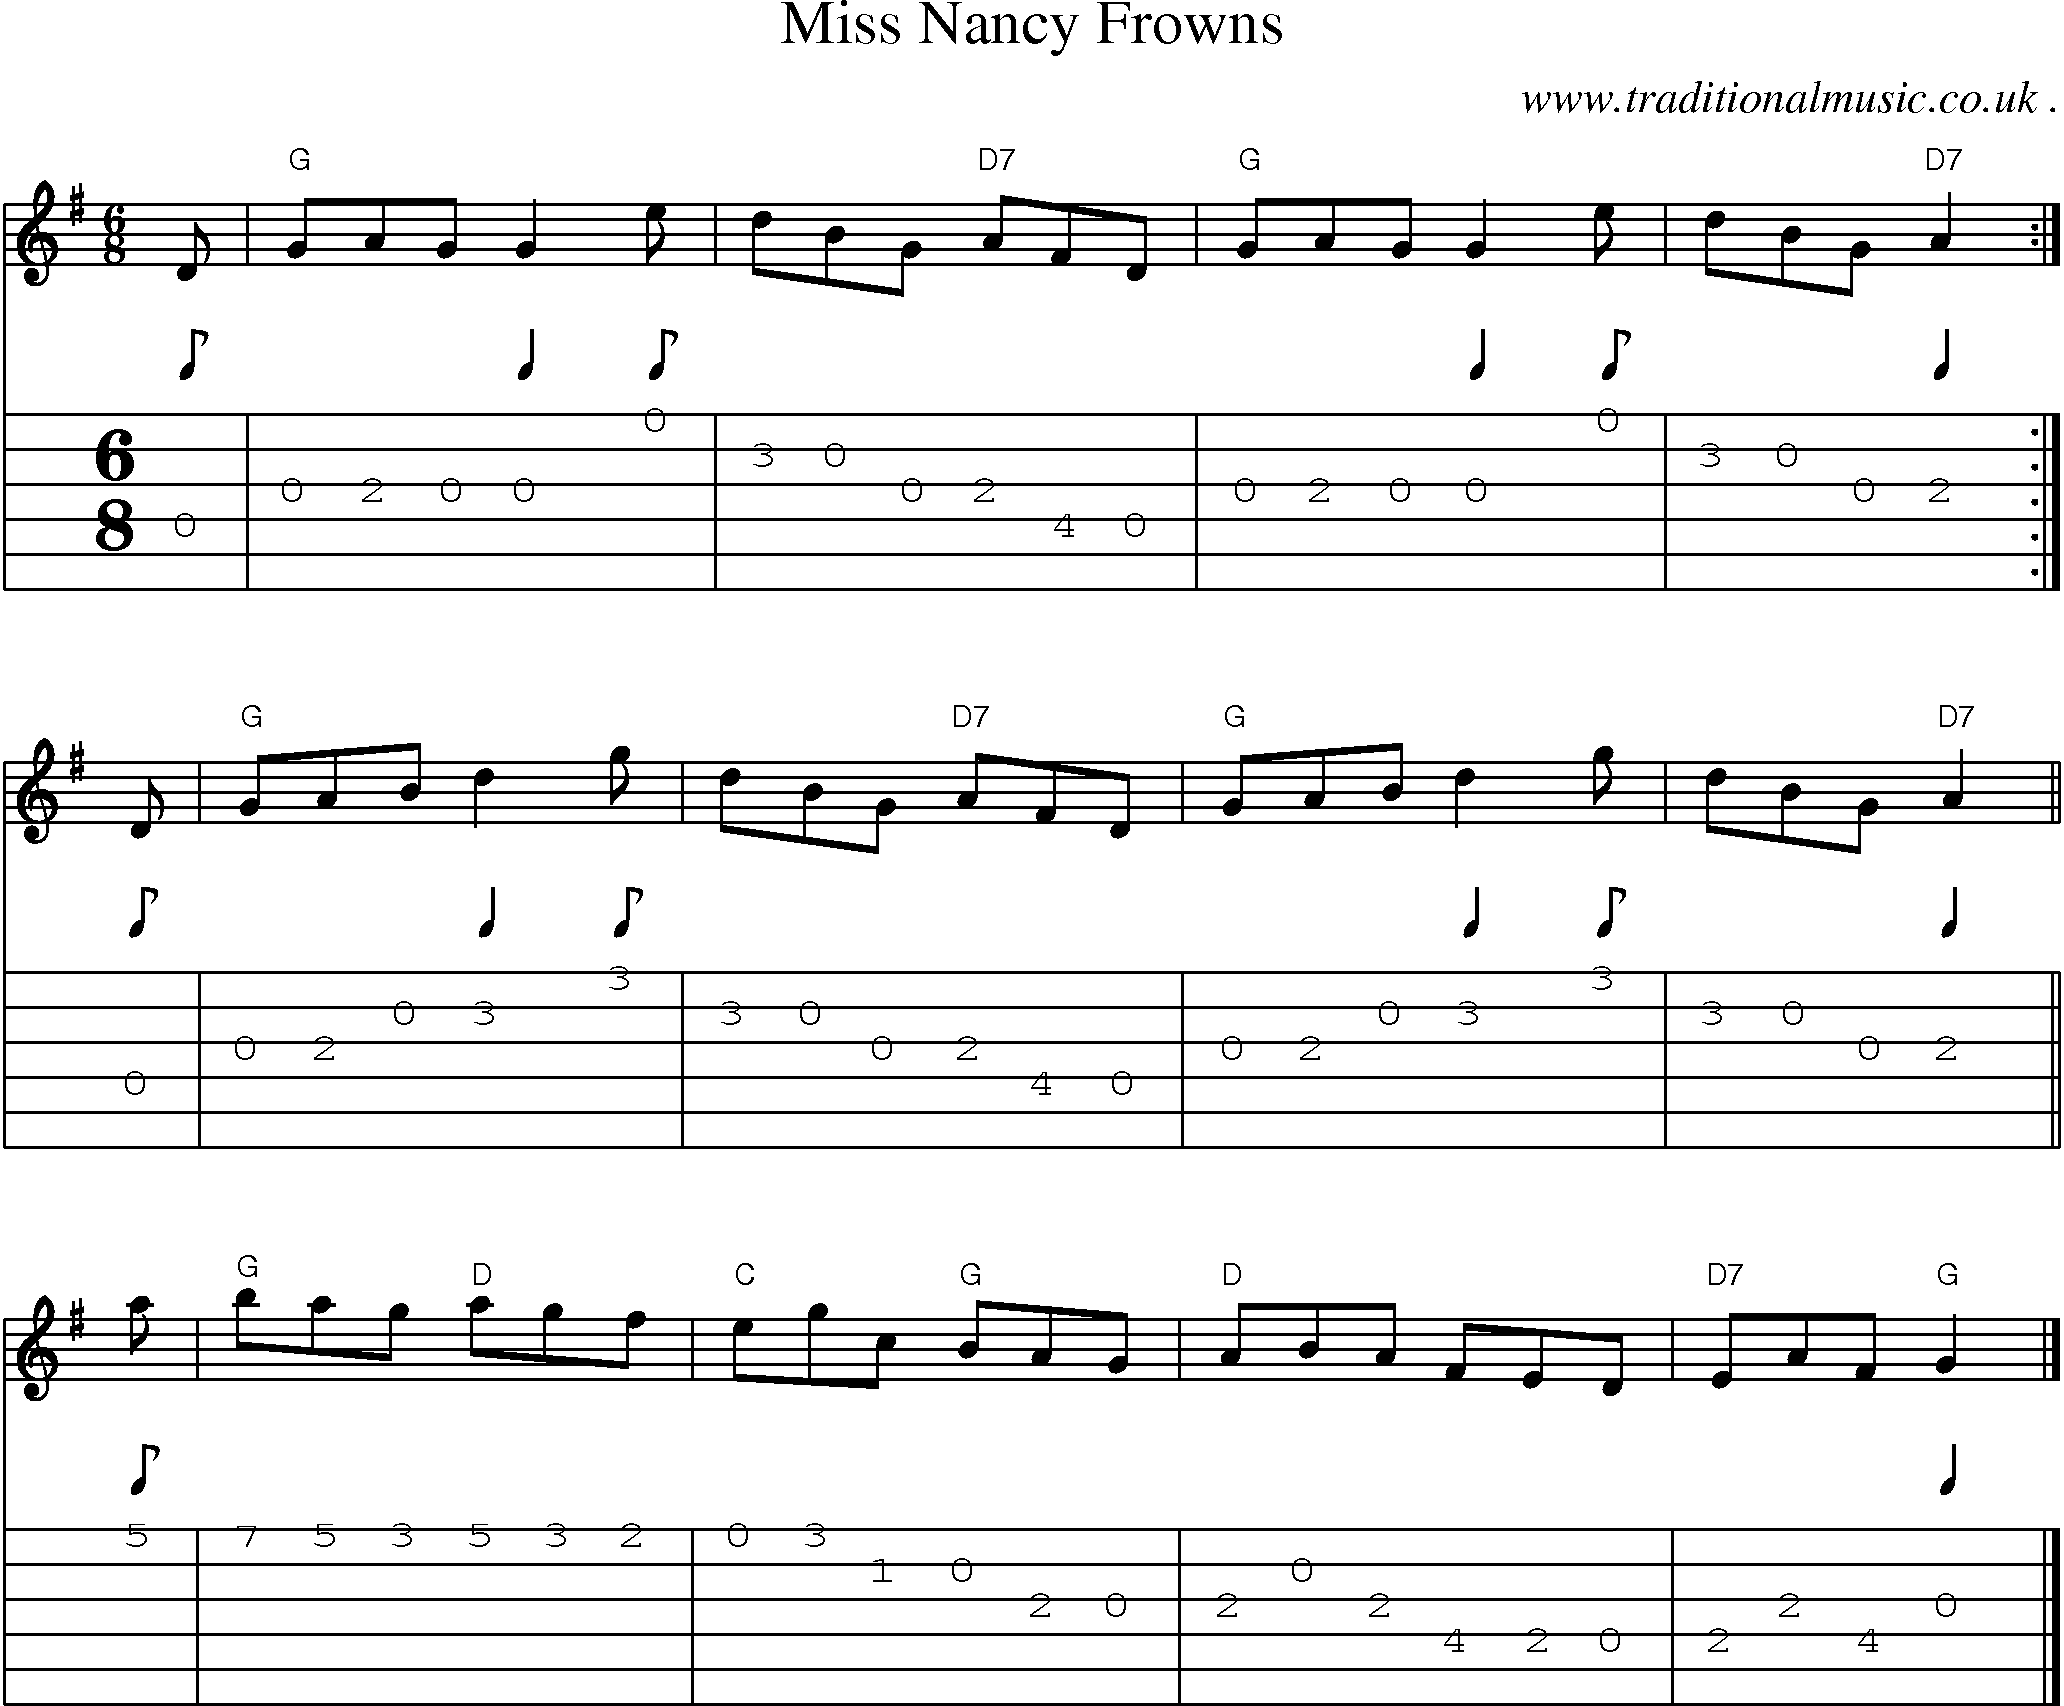 Sheet-music  score, Chords and Guitar Tabs for Miss Nancy Frowns